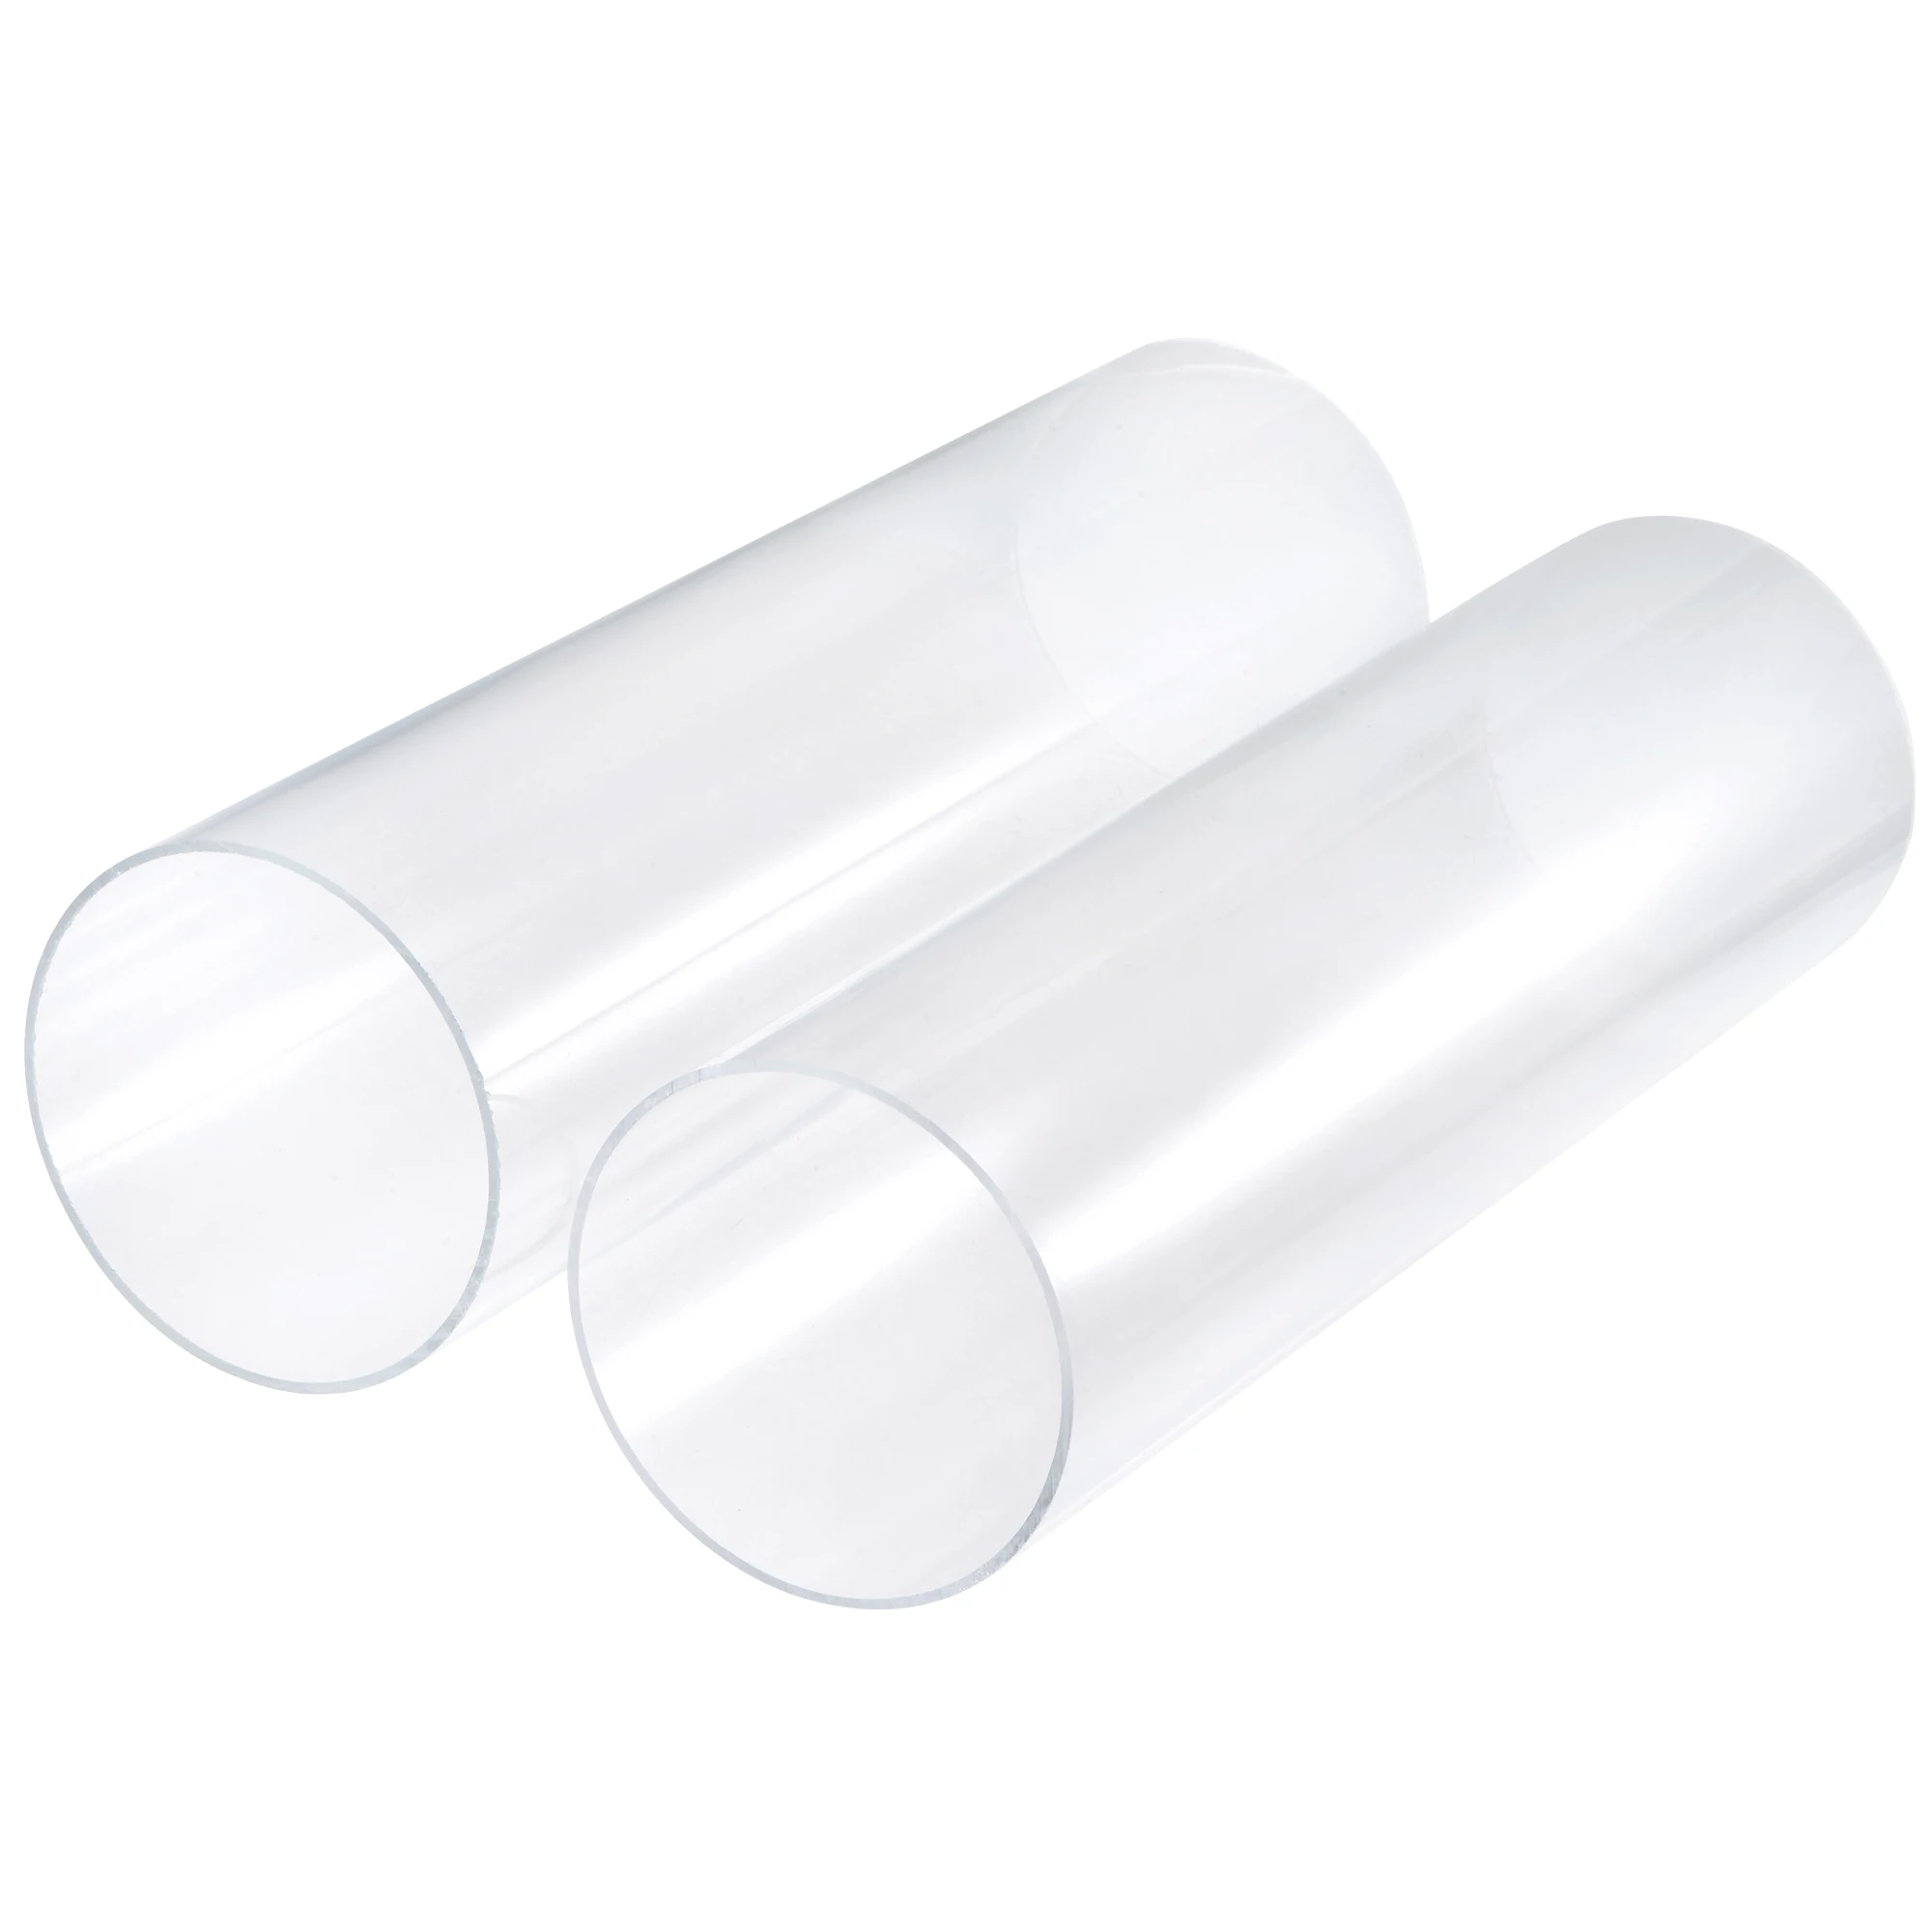 

uxcell Acrylic Pipe Rigid Round Tube Clear 3.8" ID 4" OD 12" High Impact for Lighting, Models, Plumbing, Crafts 2 Packs